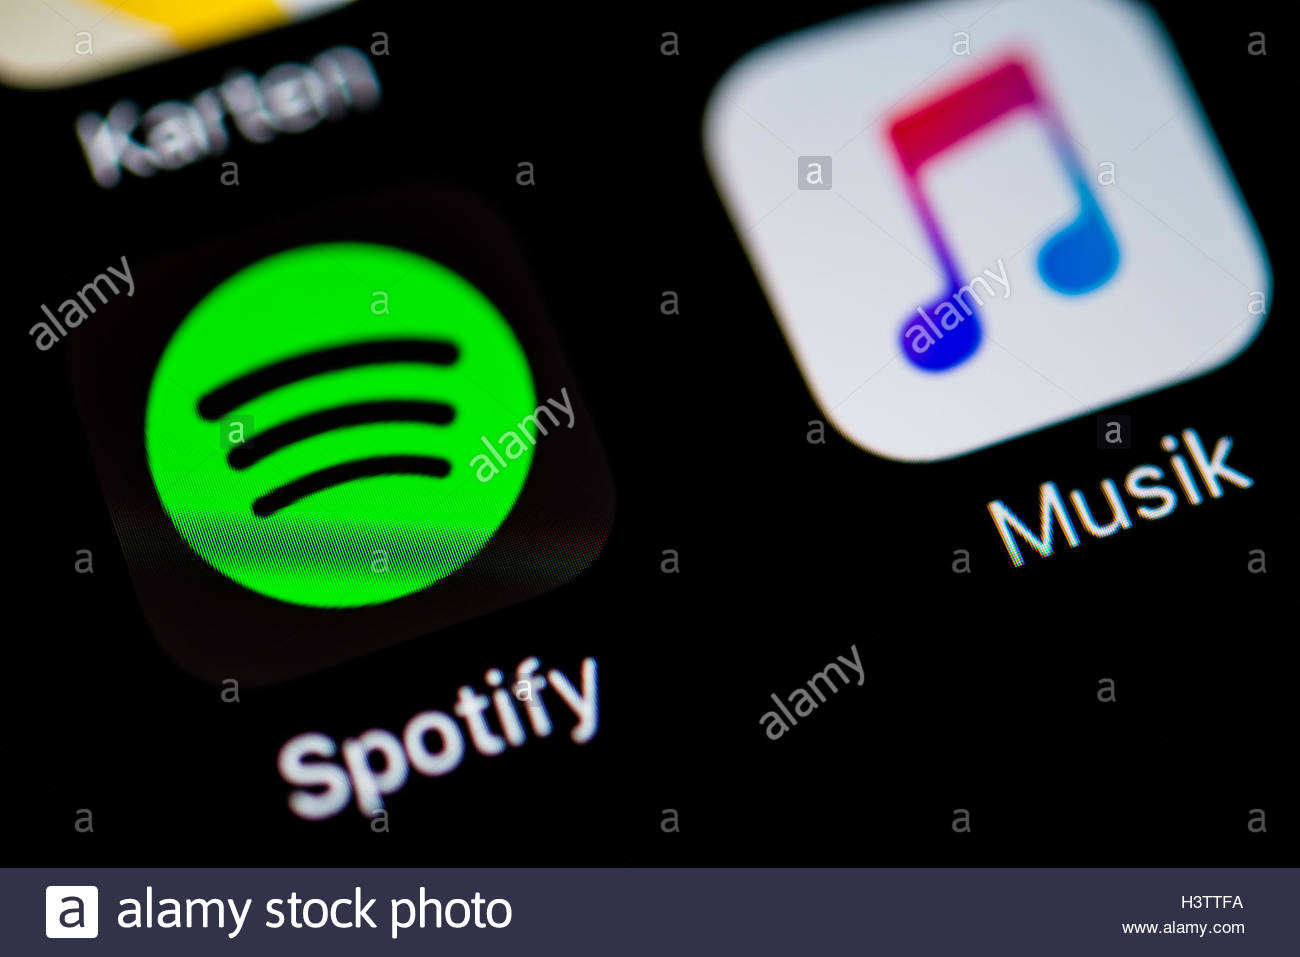 Spotify Music on the App Store